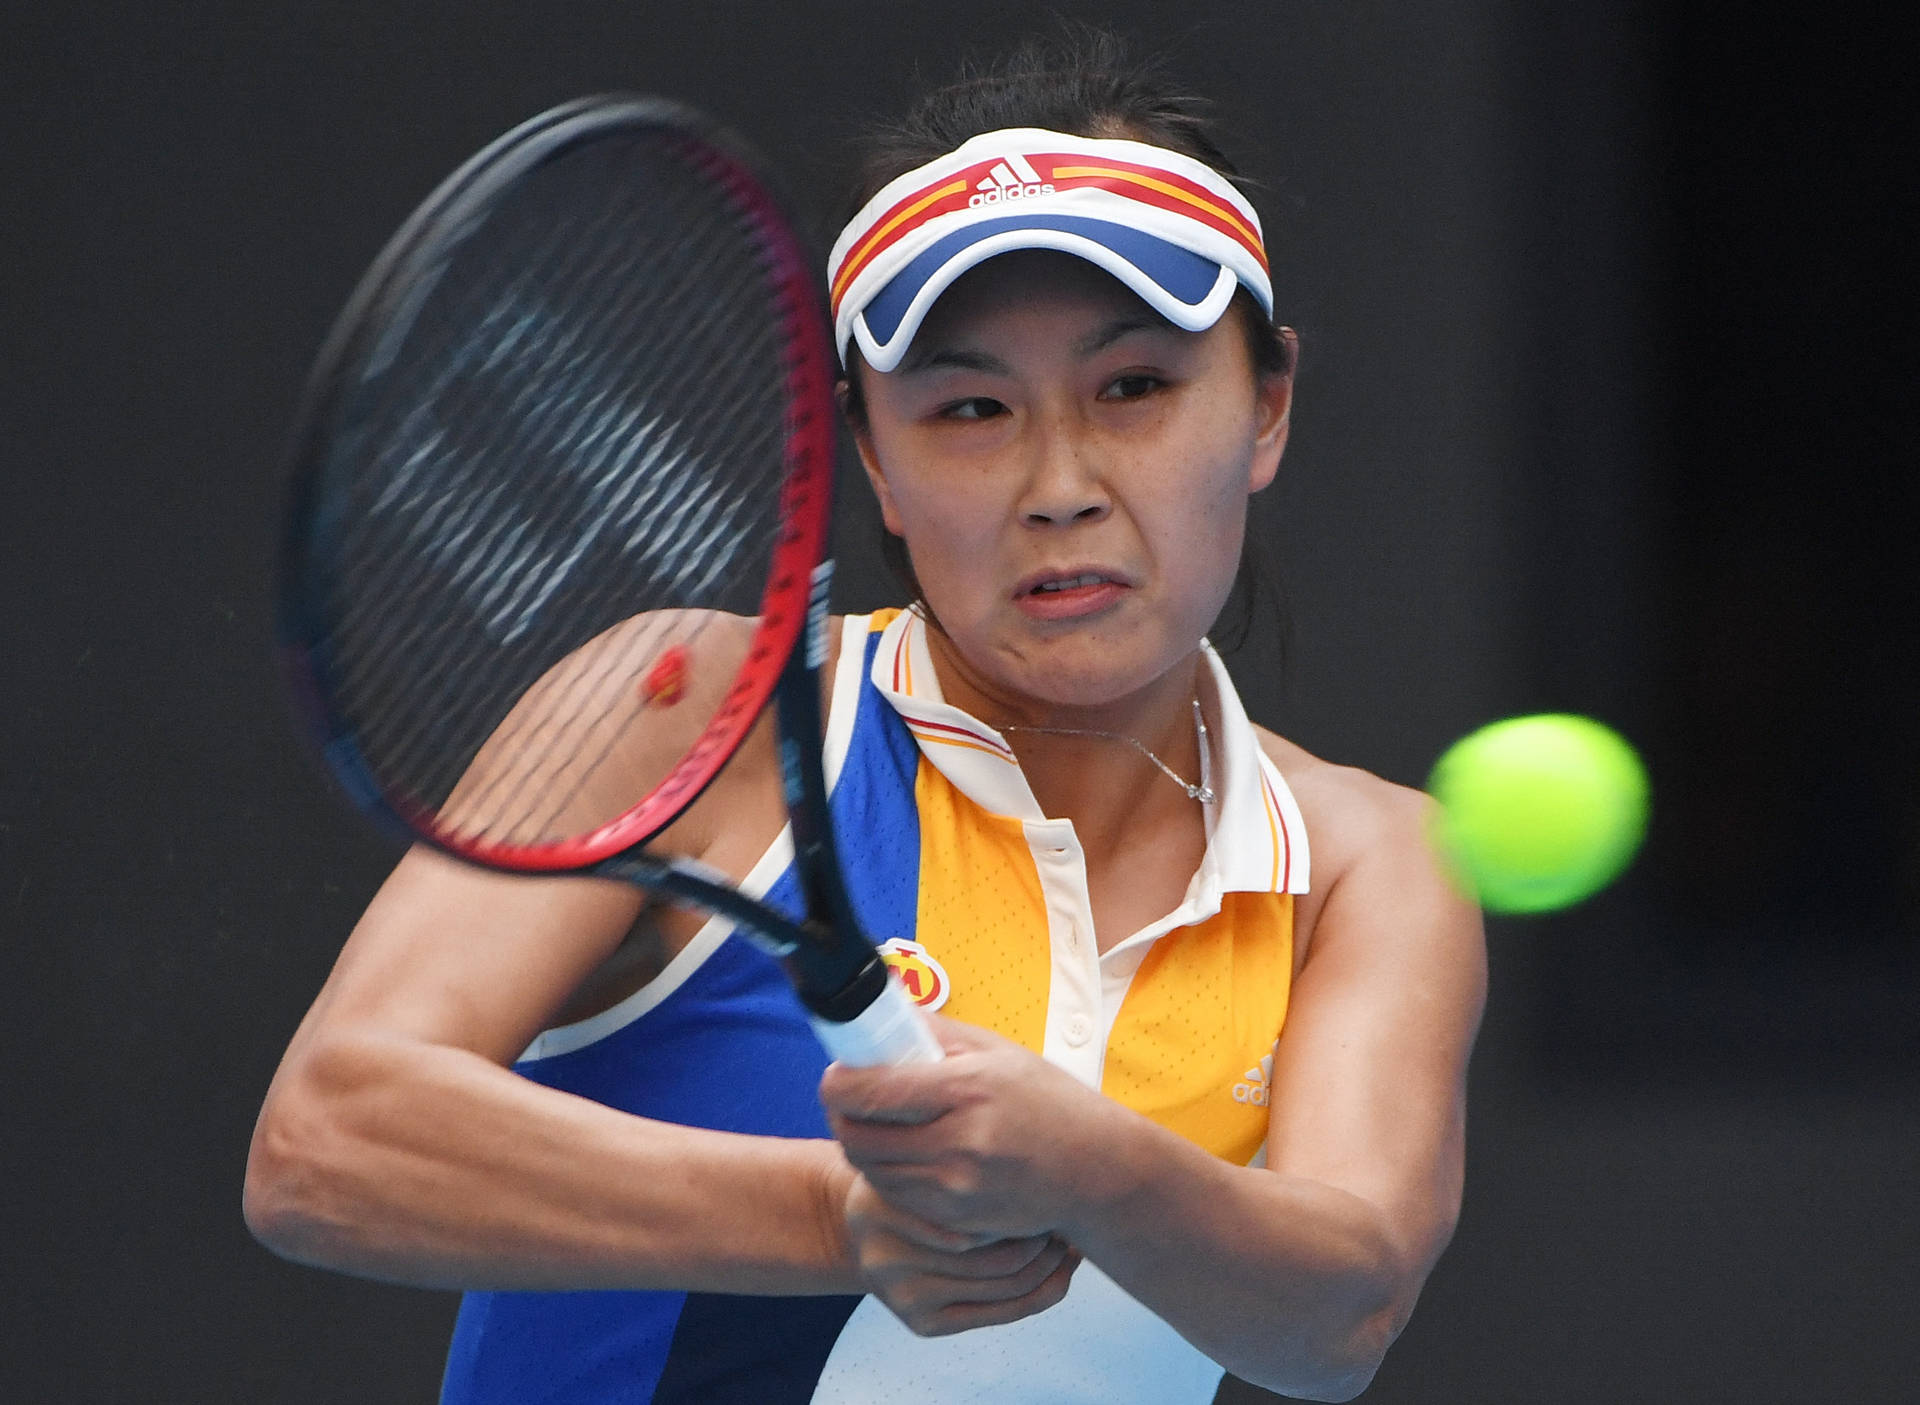 Caption: Shuai Peng in Action with her Signature Double-Hand Grip Wallpaper